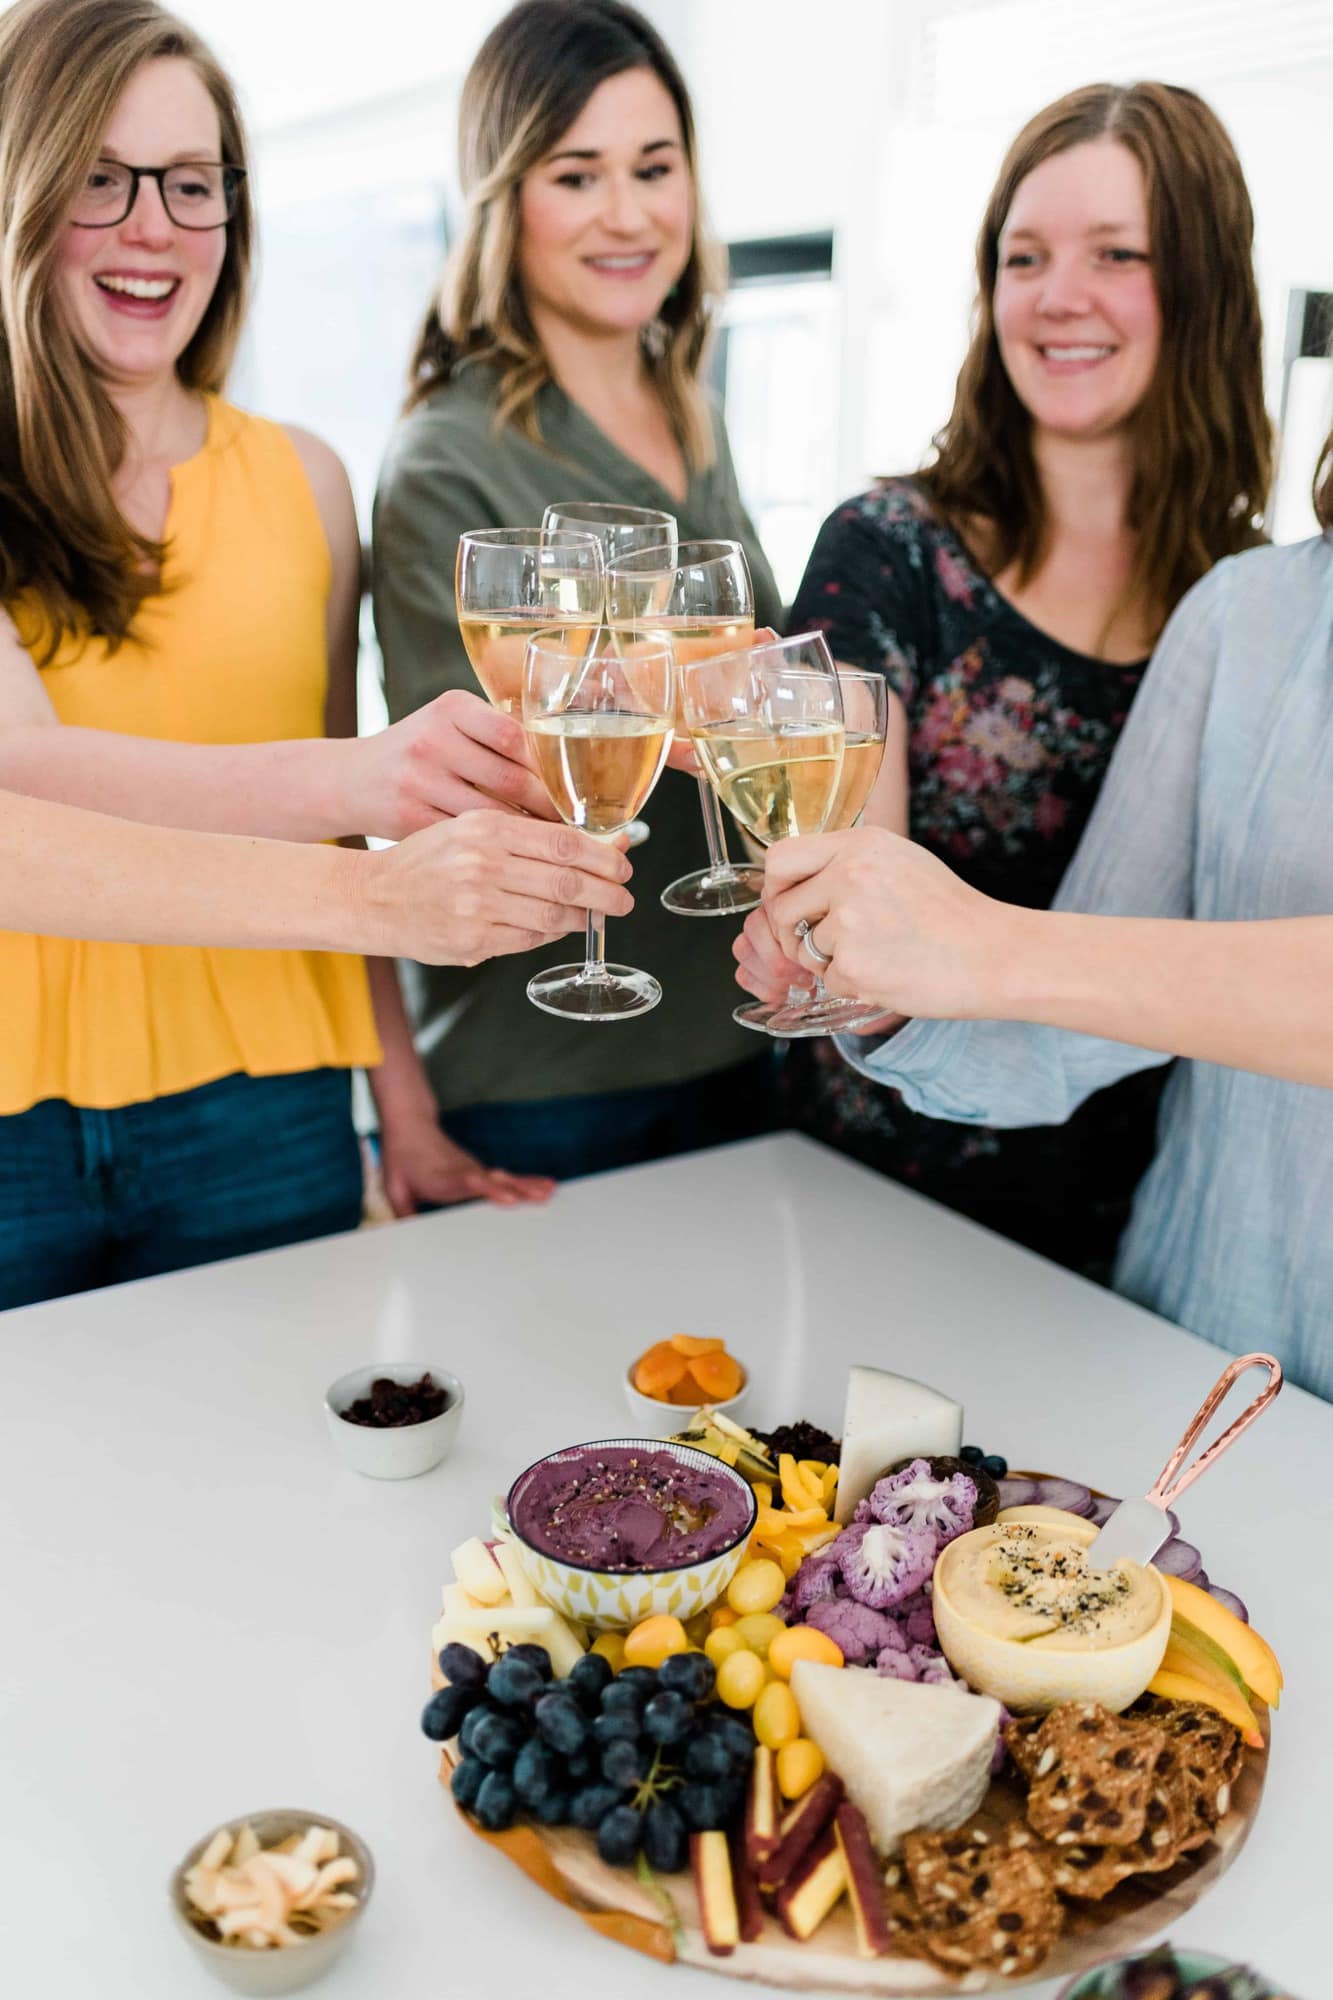 Six women clinking white wine glasses together